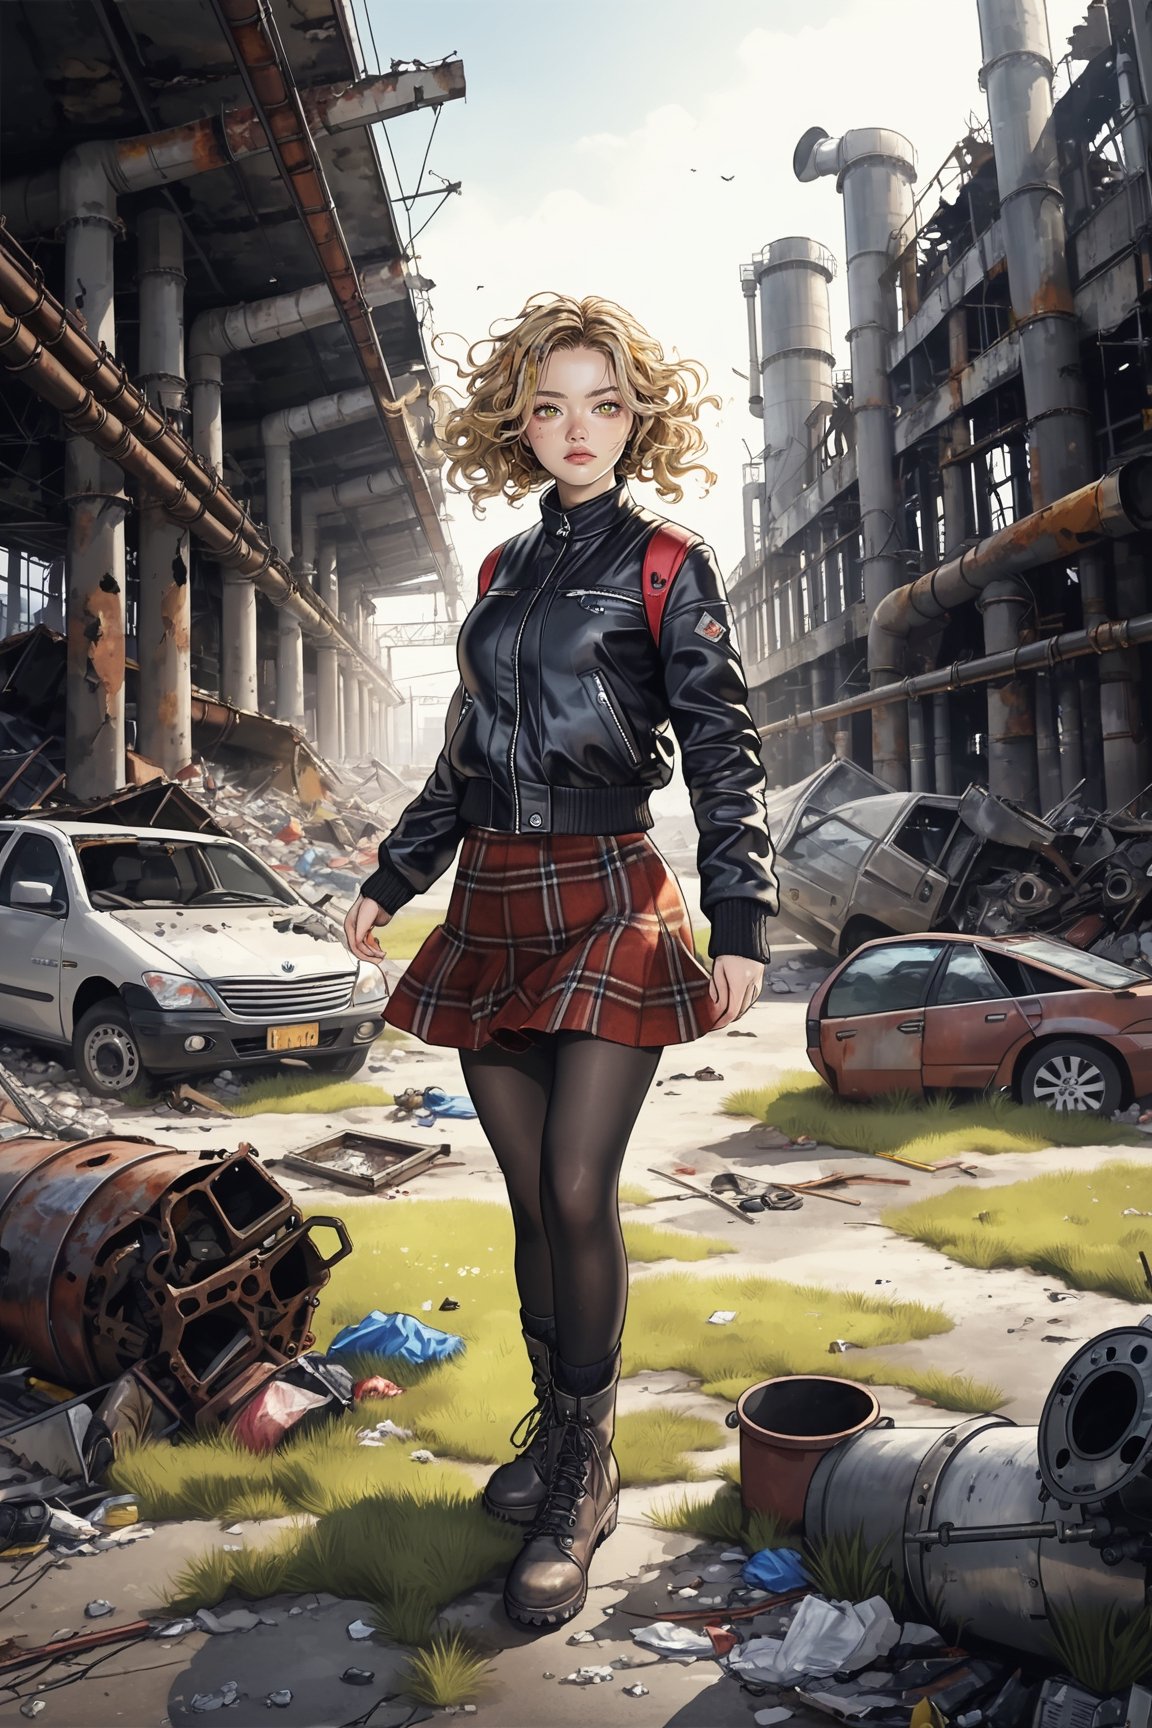 An artistic vision of a female adventurer surveying a destroyed city. She is wearing a warm outfit with a closely fitted jacket, warm woolen skirt, black tights, and ankle boots. She is dancing next to a Kawasaki Vulcan 1700 Voyager motorcycle. Fierce and confident expression, suggestive poses exuding seductive charm. Blonde hair styled into ringlets that framed the face. An abandoned factory, deserted, rusty boilers, pipes, excavator wreck, grass, scattered garbage, vibrant colors. Highly detailed. Delicate minimalism. Close-up shot. Super wide angle, 